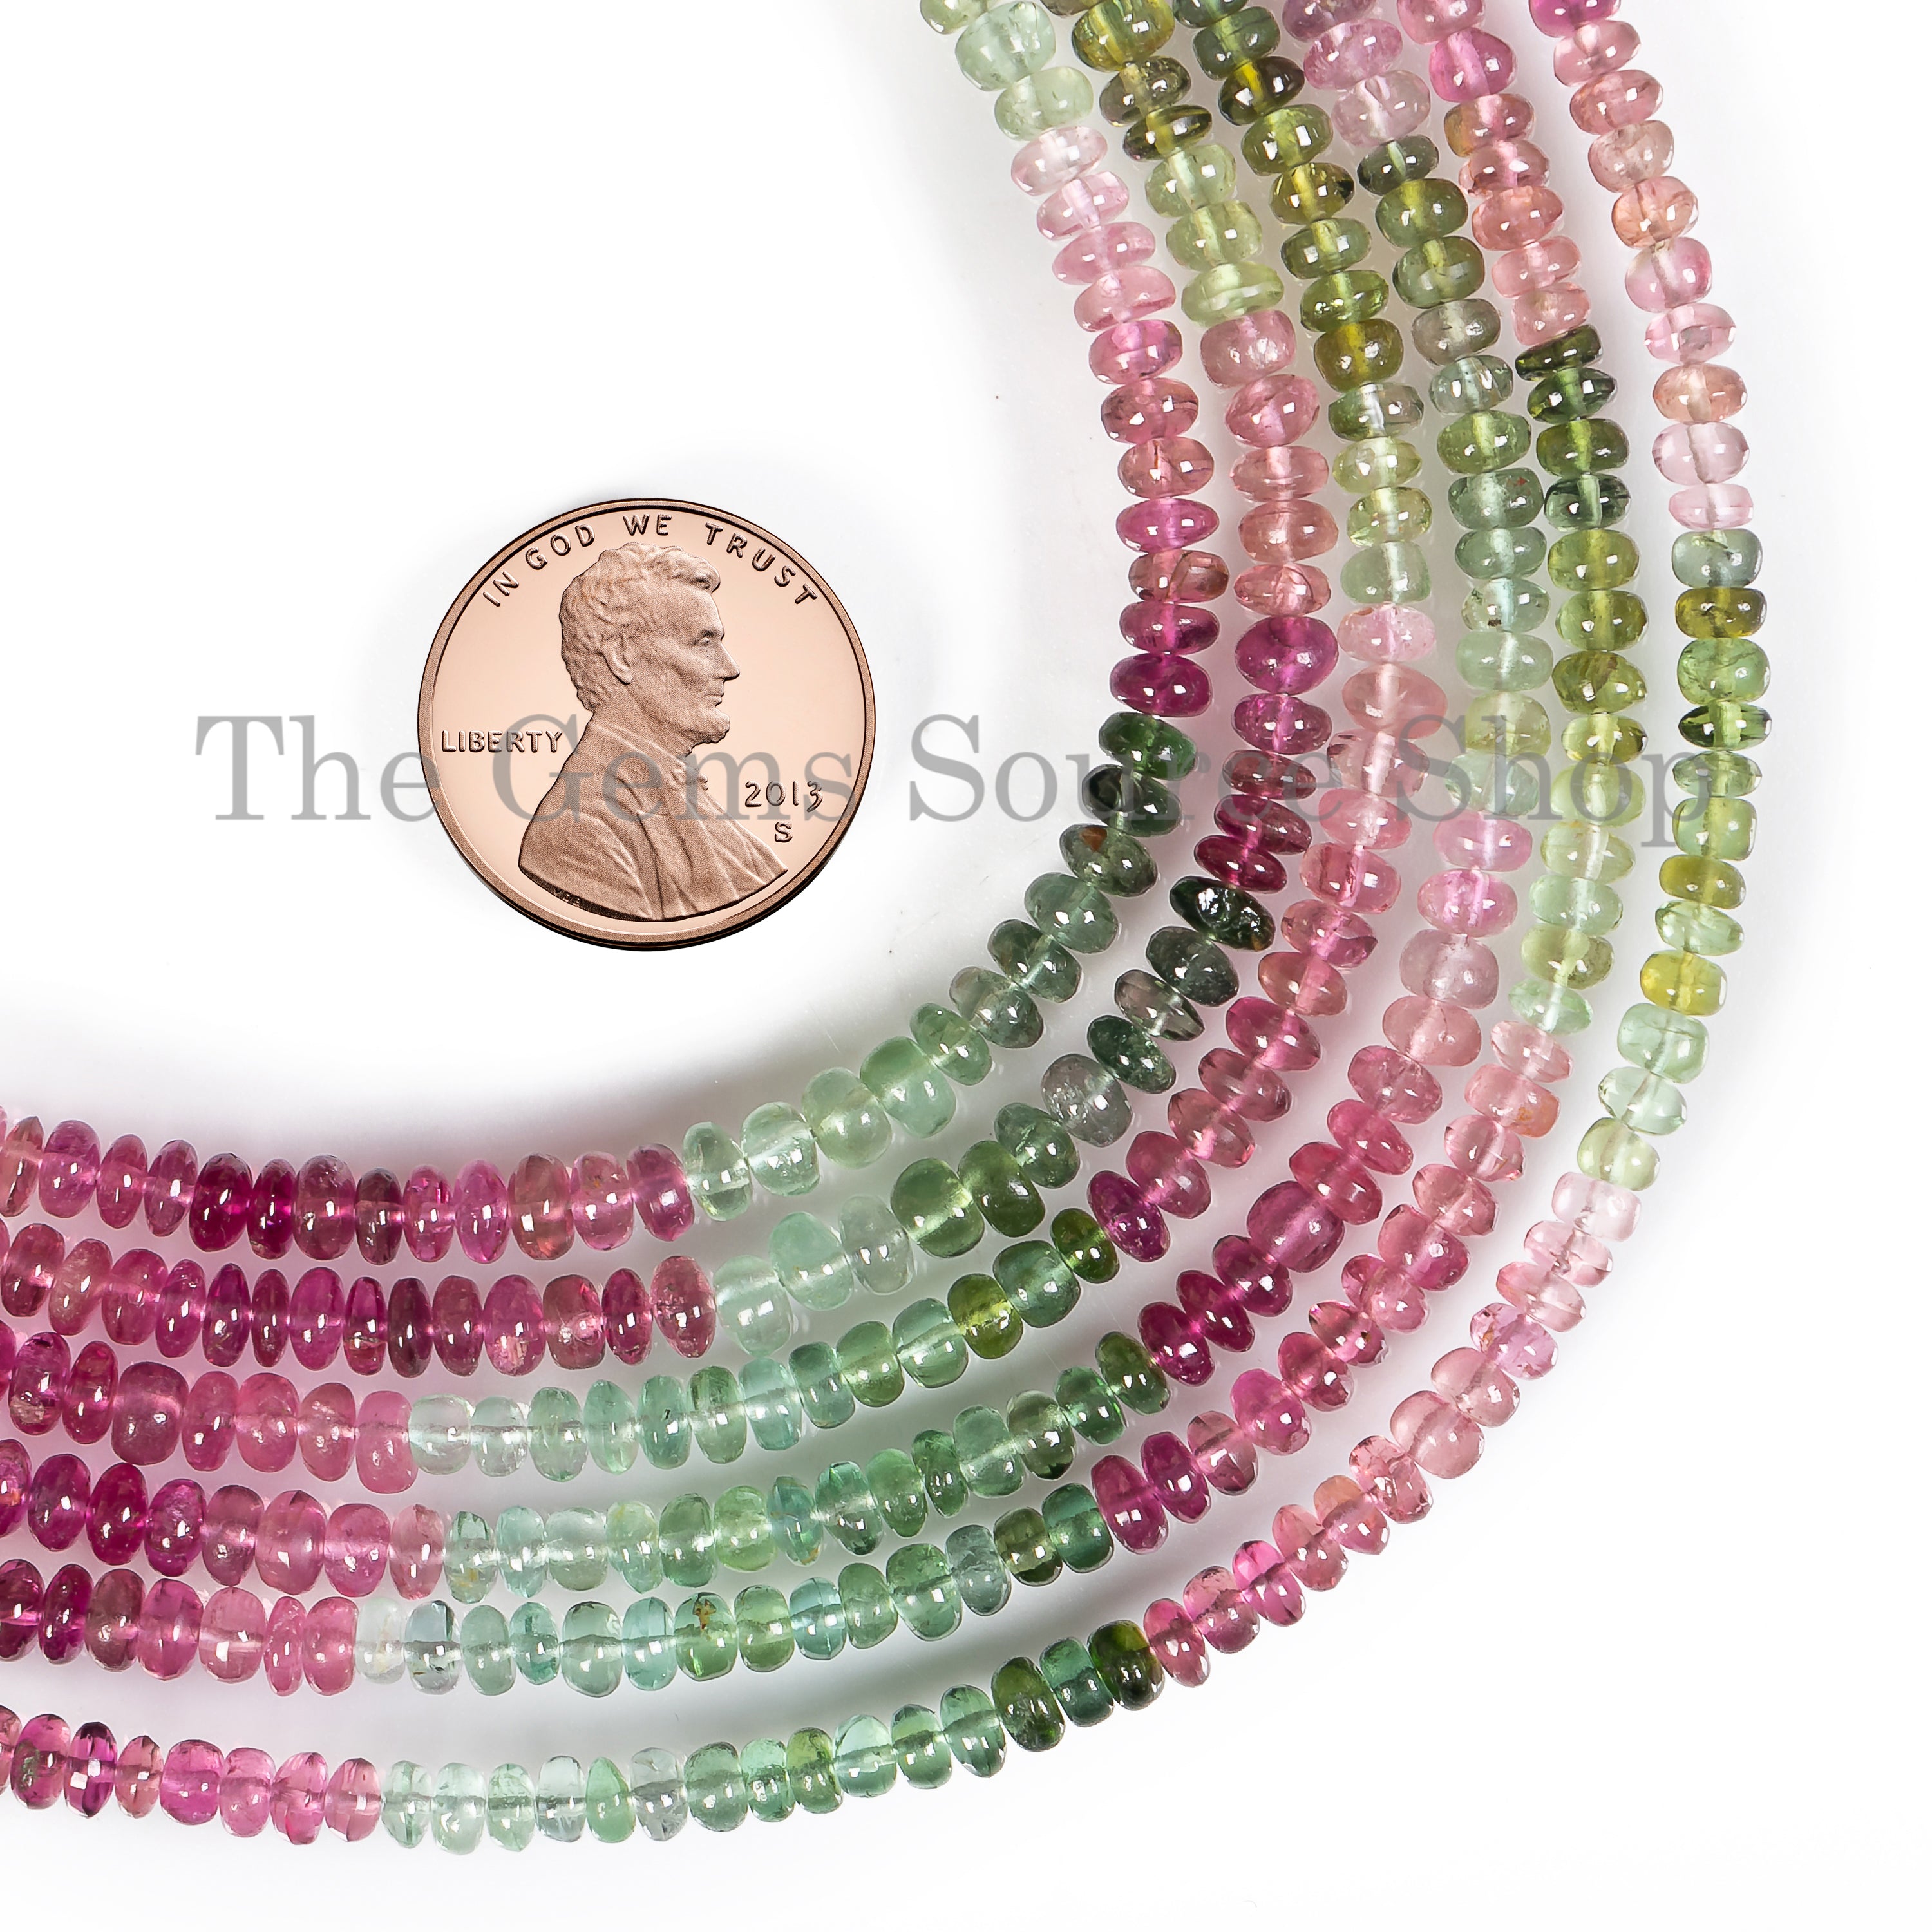 4-4.25mm Natural Multi Tourmaline Smooth Rondelle .40mm Center Drilled Beads Wholesale jewelry making beads